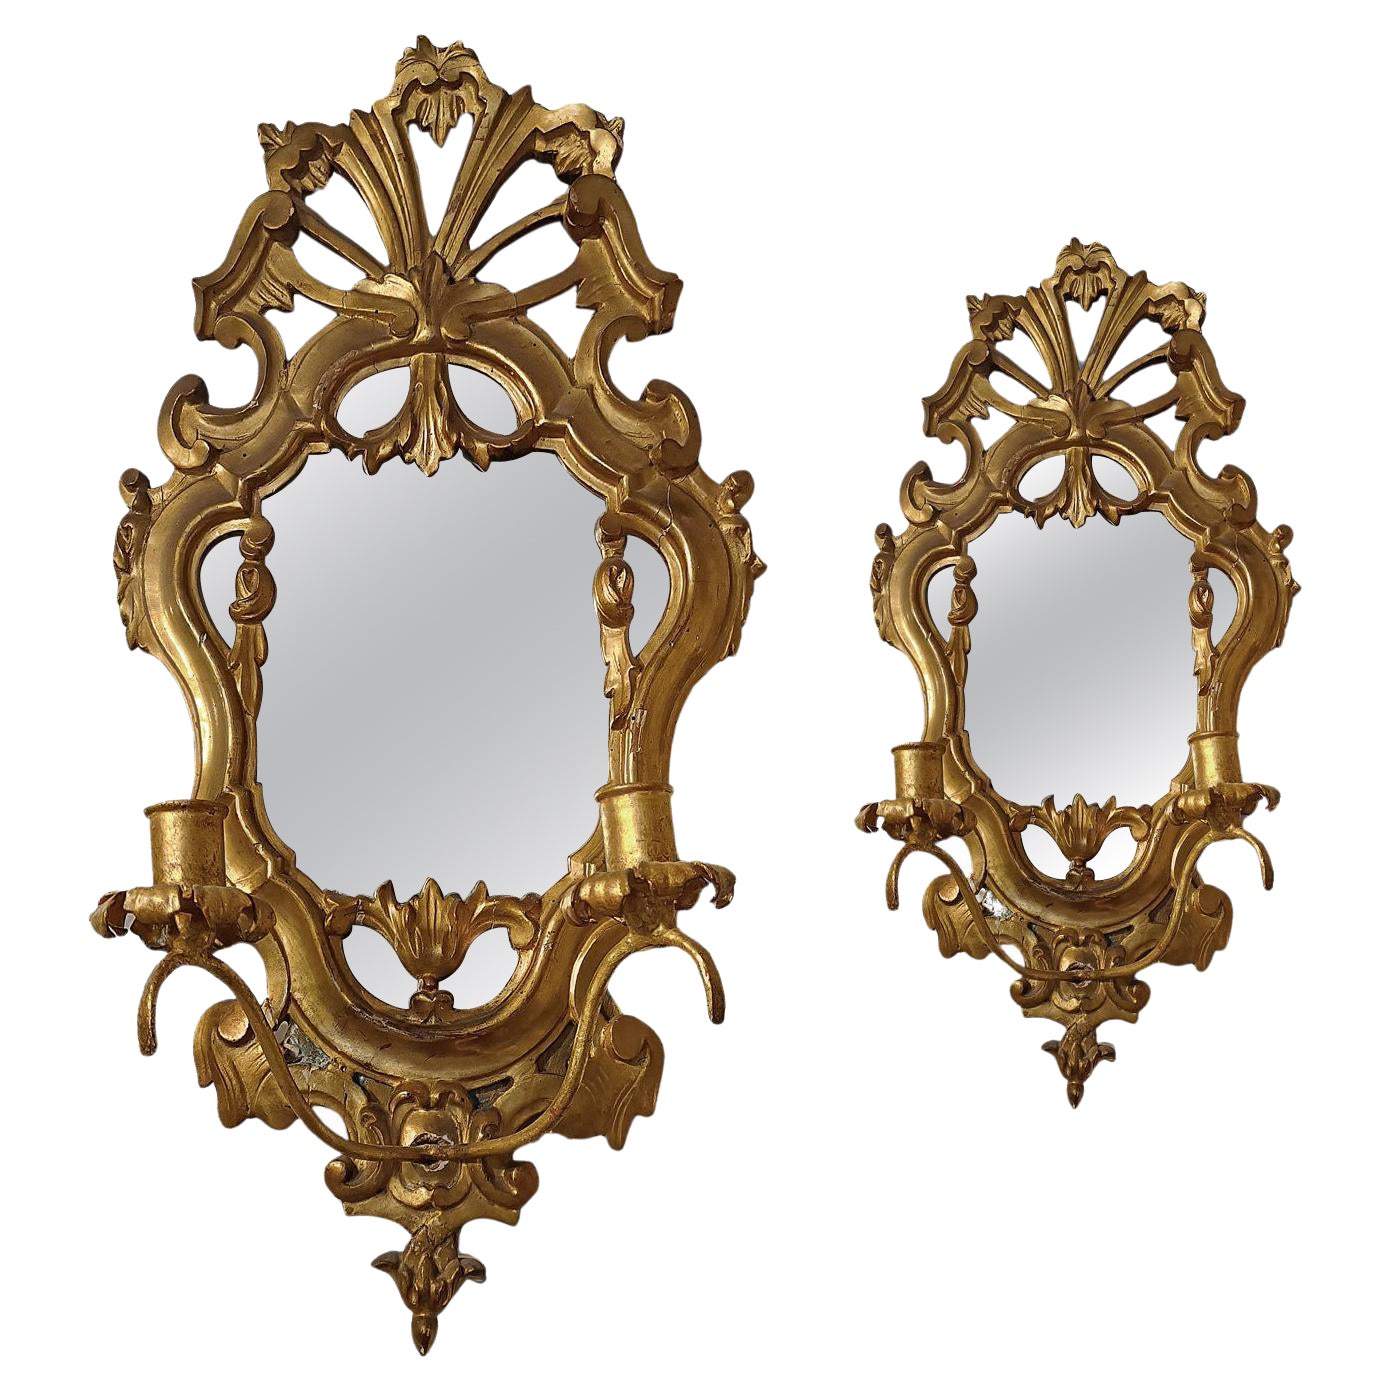 18th CENTURY PAIR OF SMALL GOLDEN MIRRORS WITH CANDLE HOLDERS